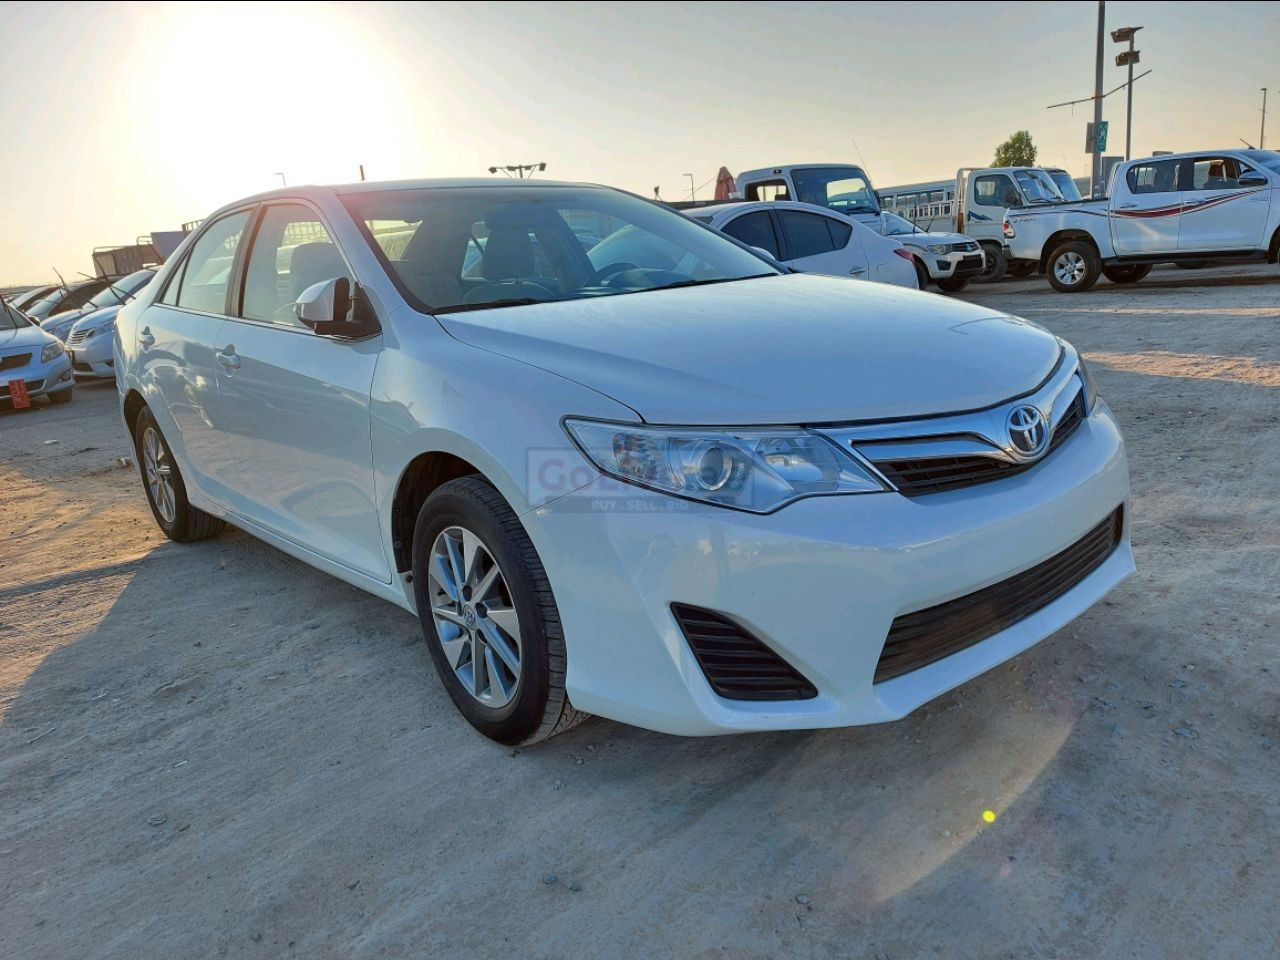 Toyota Camry 2014 GCC Spec for sale